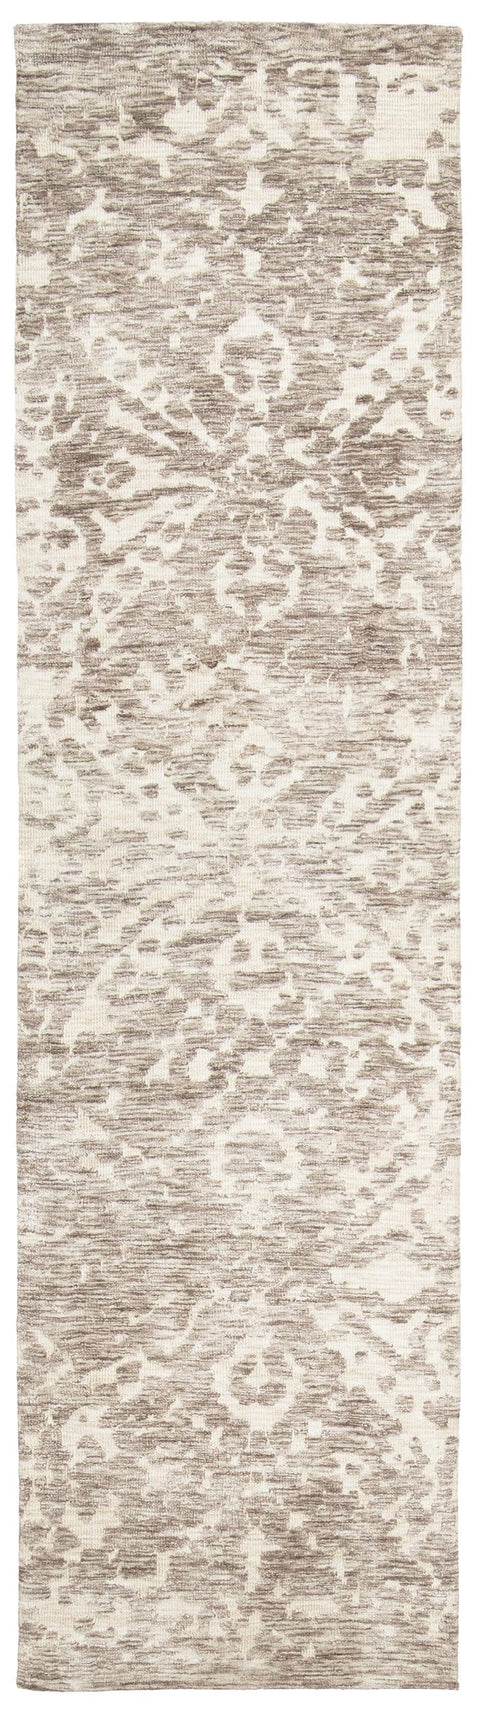 Quinn Grey Ivory And Cream Floral Motif Runner Rug